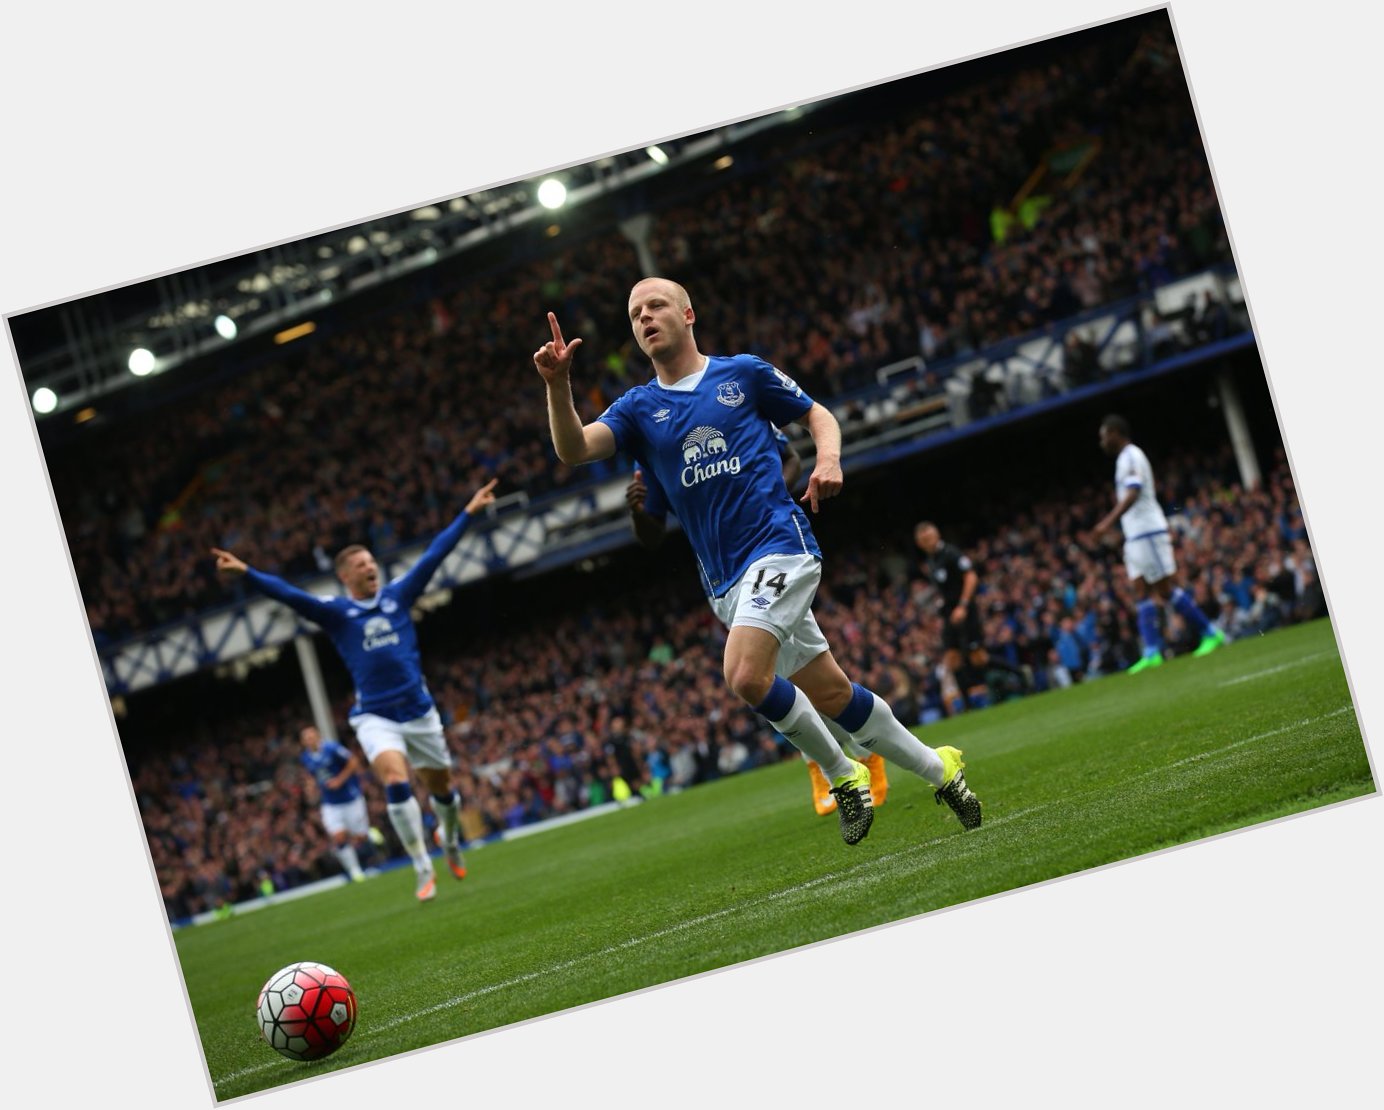 Happy Birthday to Steven Naismith who celebrated in perfect fashion with a hat-trick on Saturday against Chelsea 